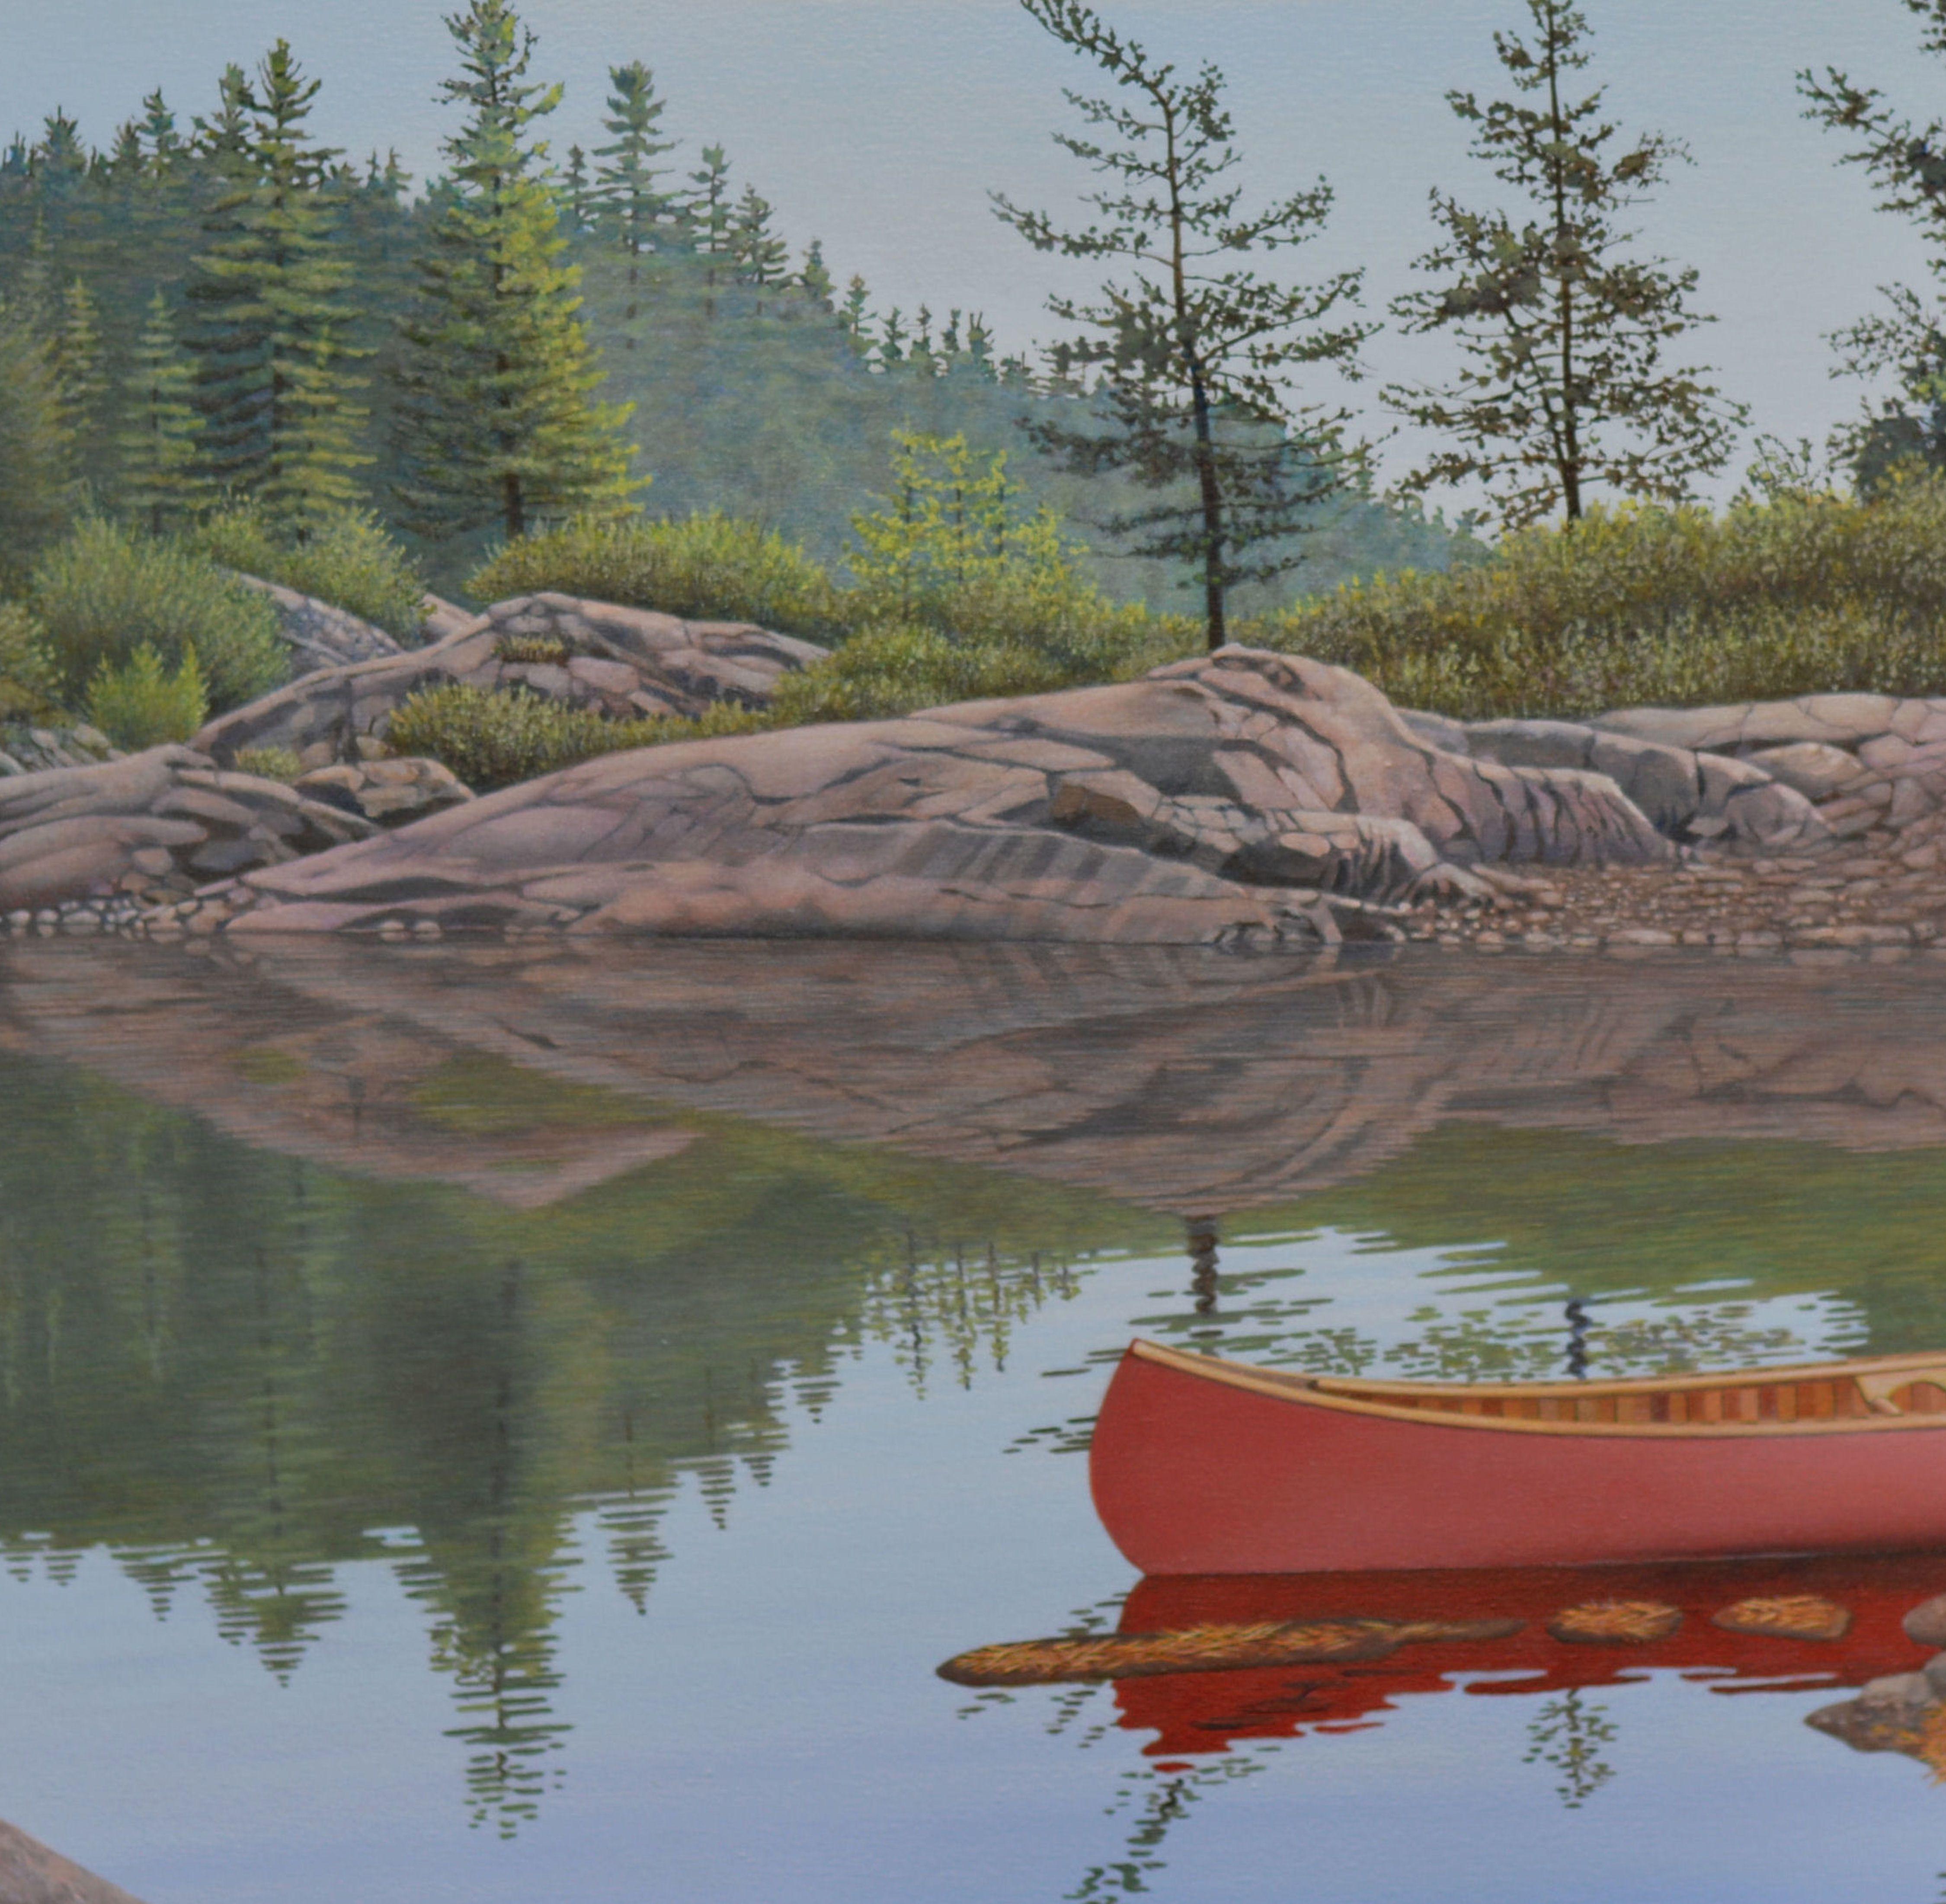 This scene was created from a combination of photos my wife Loretta and I took while on vacation in Canada's northland.  I take my favorite elements and compose the final scene from my imagination.  ** Please note that due to the size of the canvas,